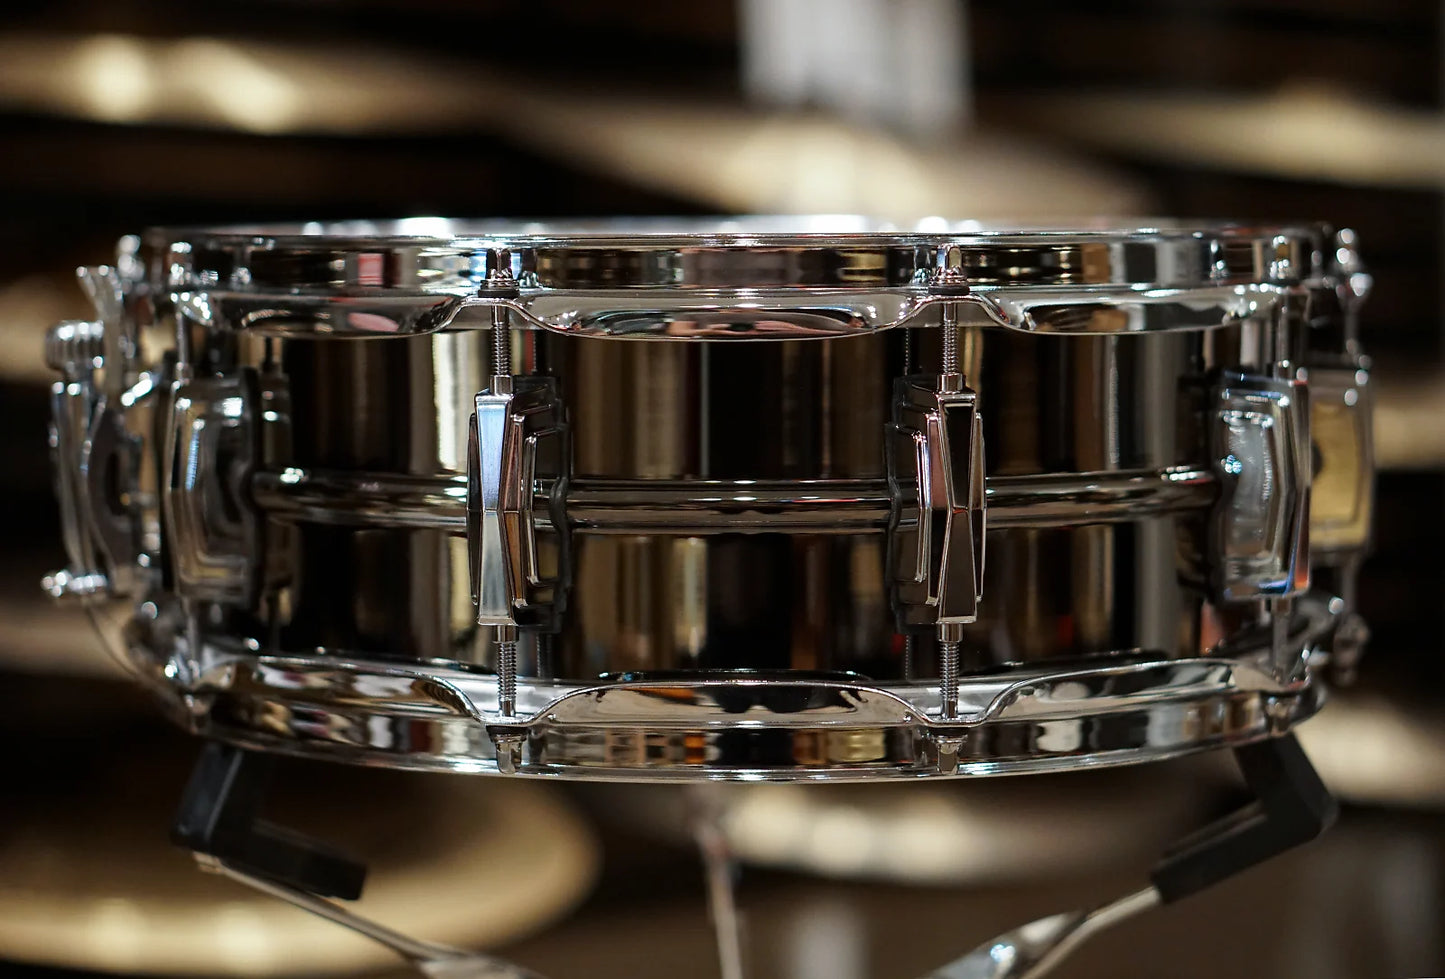 Ludwig 5x14" Black Beauty Snare Drum - (LB416)